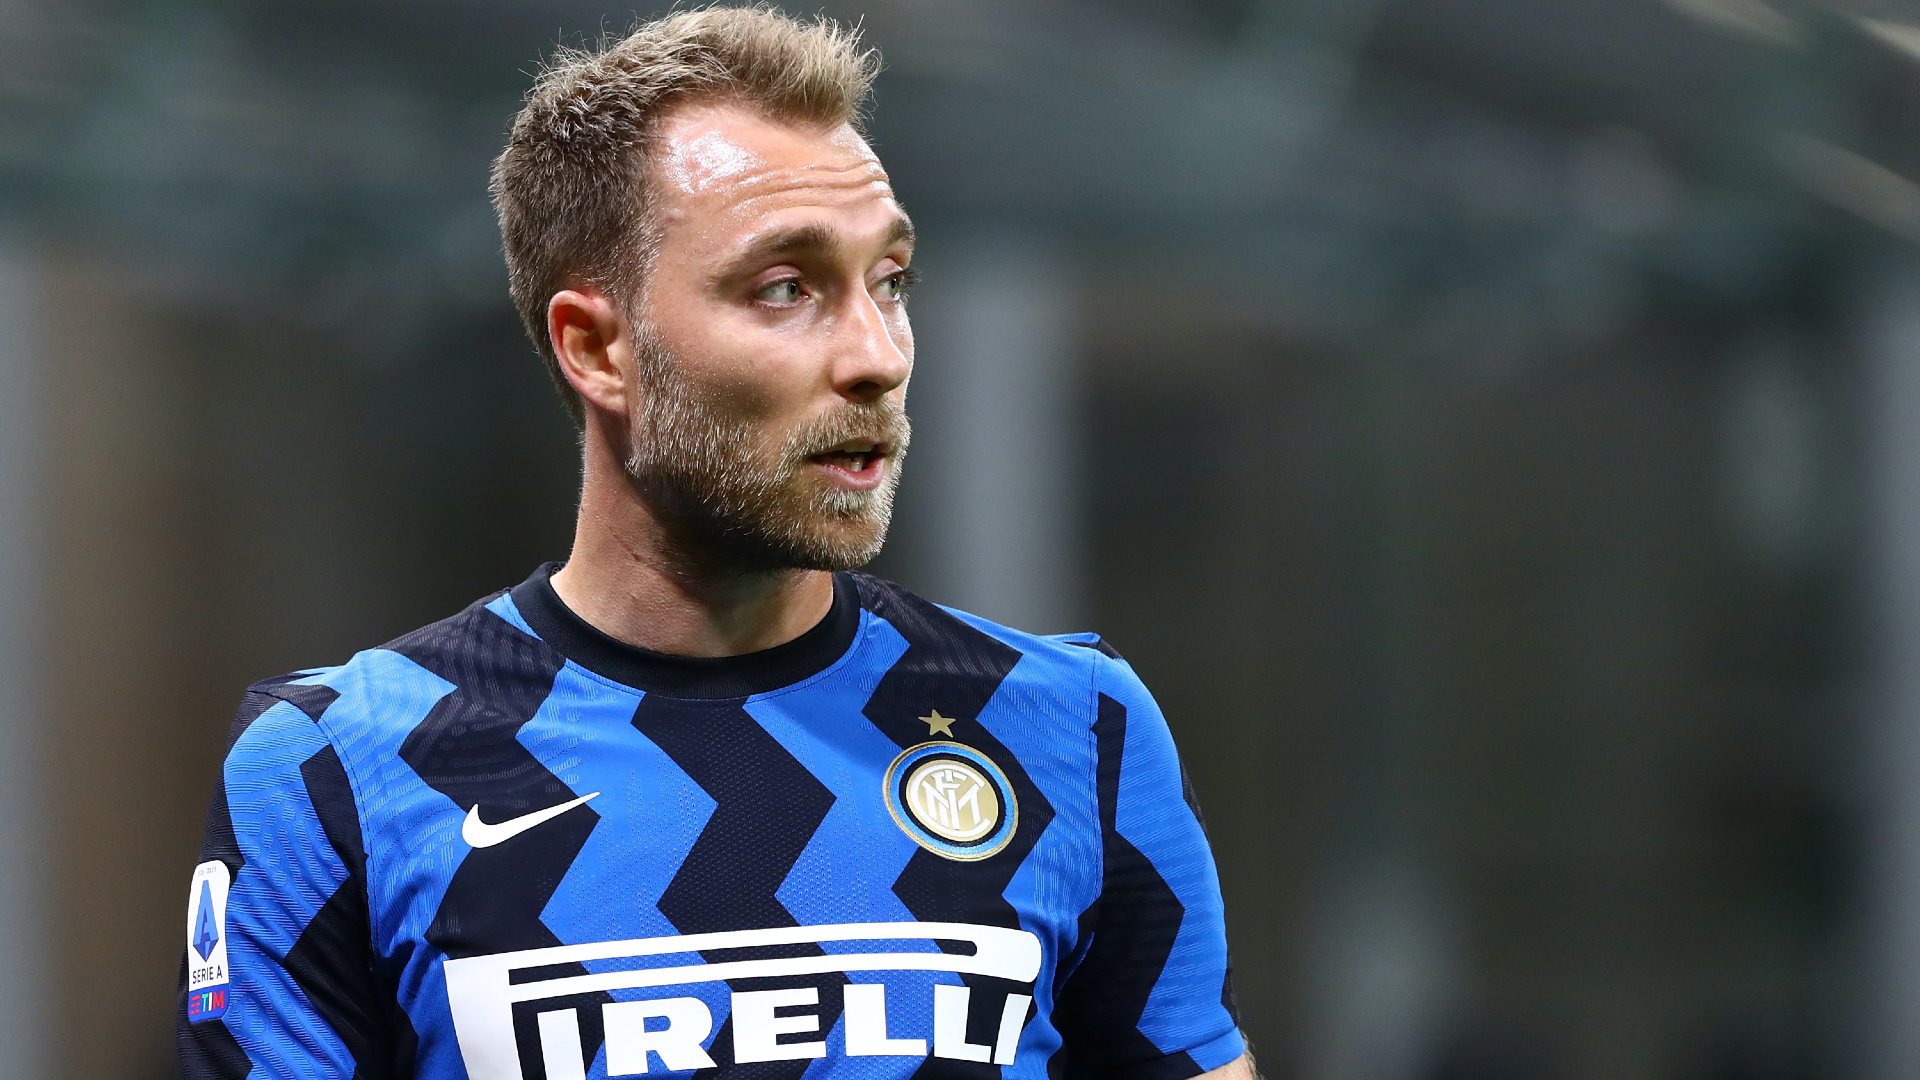 'Eriksen will be first to ask for a transfer' - Marotta expecting Inter outcast to seek exit